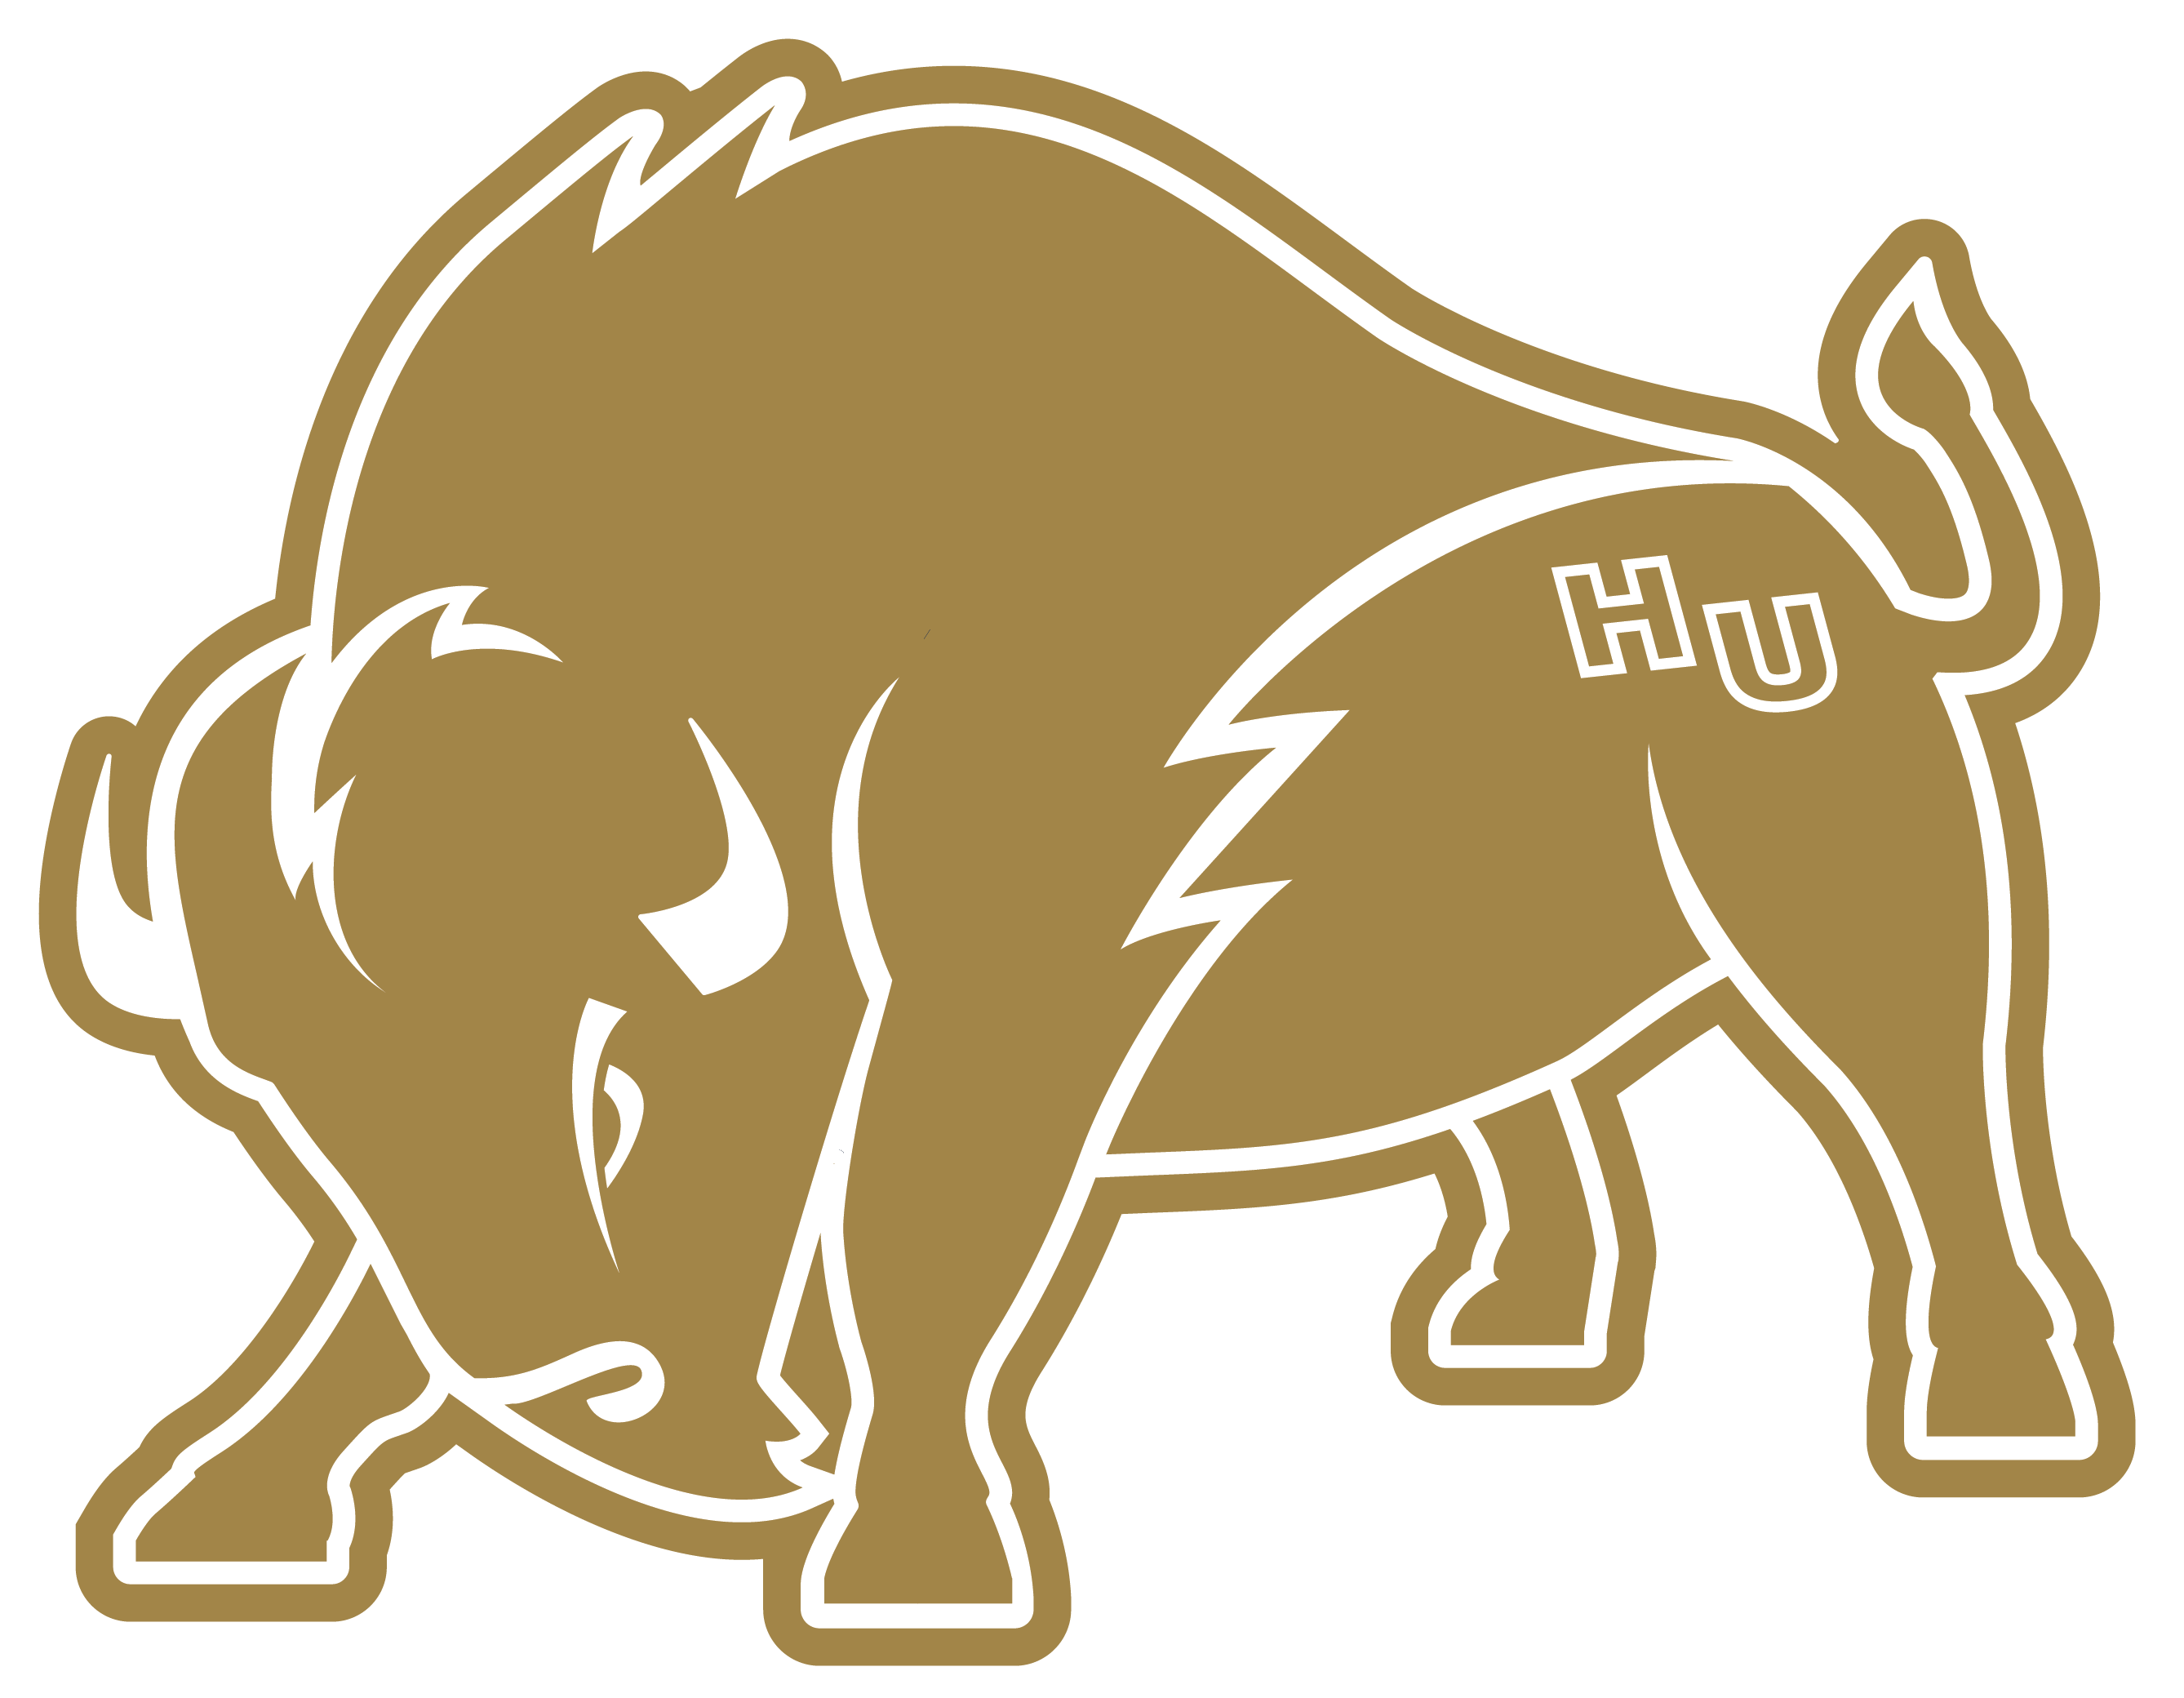 This is an icon created by Harding University.